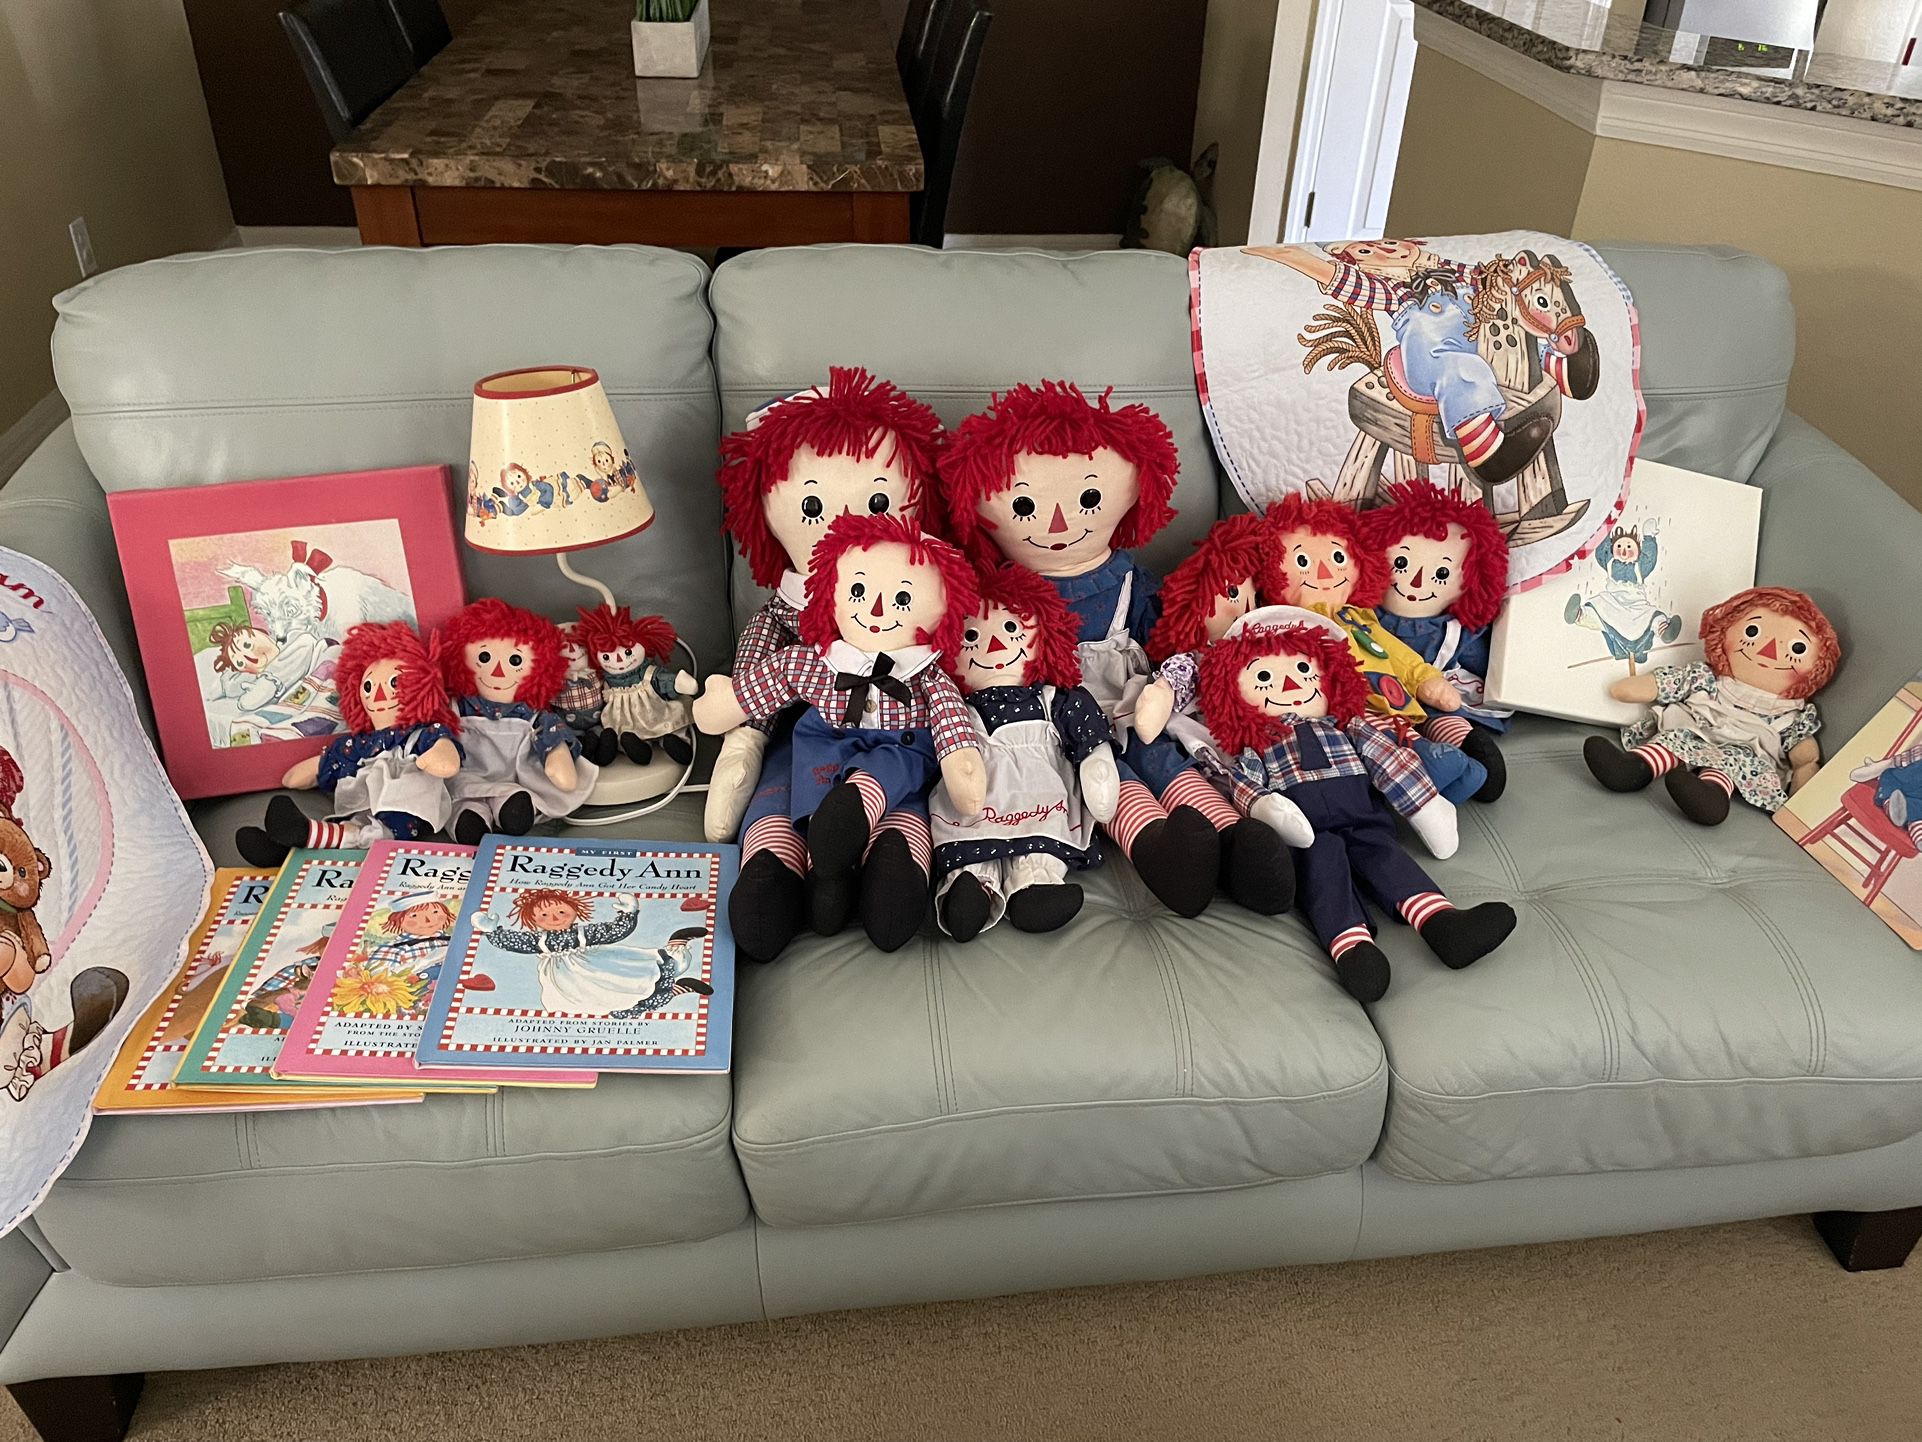 Raggedy Ann & Andy Collectibles